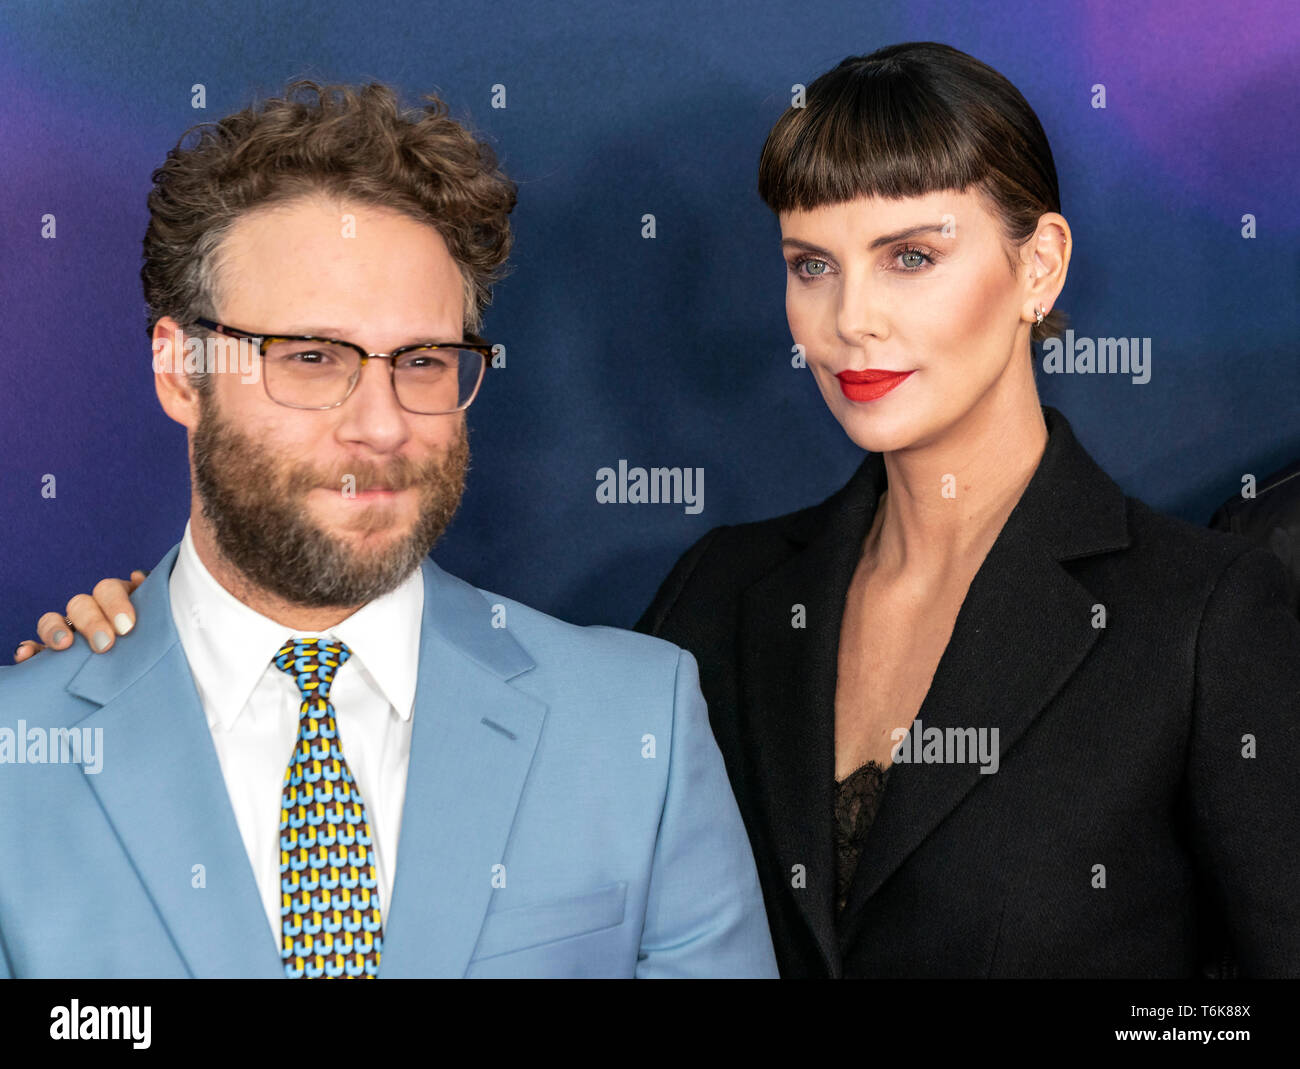 New York, NY - APRIL 30: Seth Rogen and Charlize Theron attend the premiere of 'Long Shot' at AMC Lincoln Square Theater Stock Photo